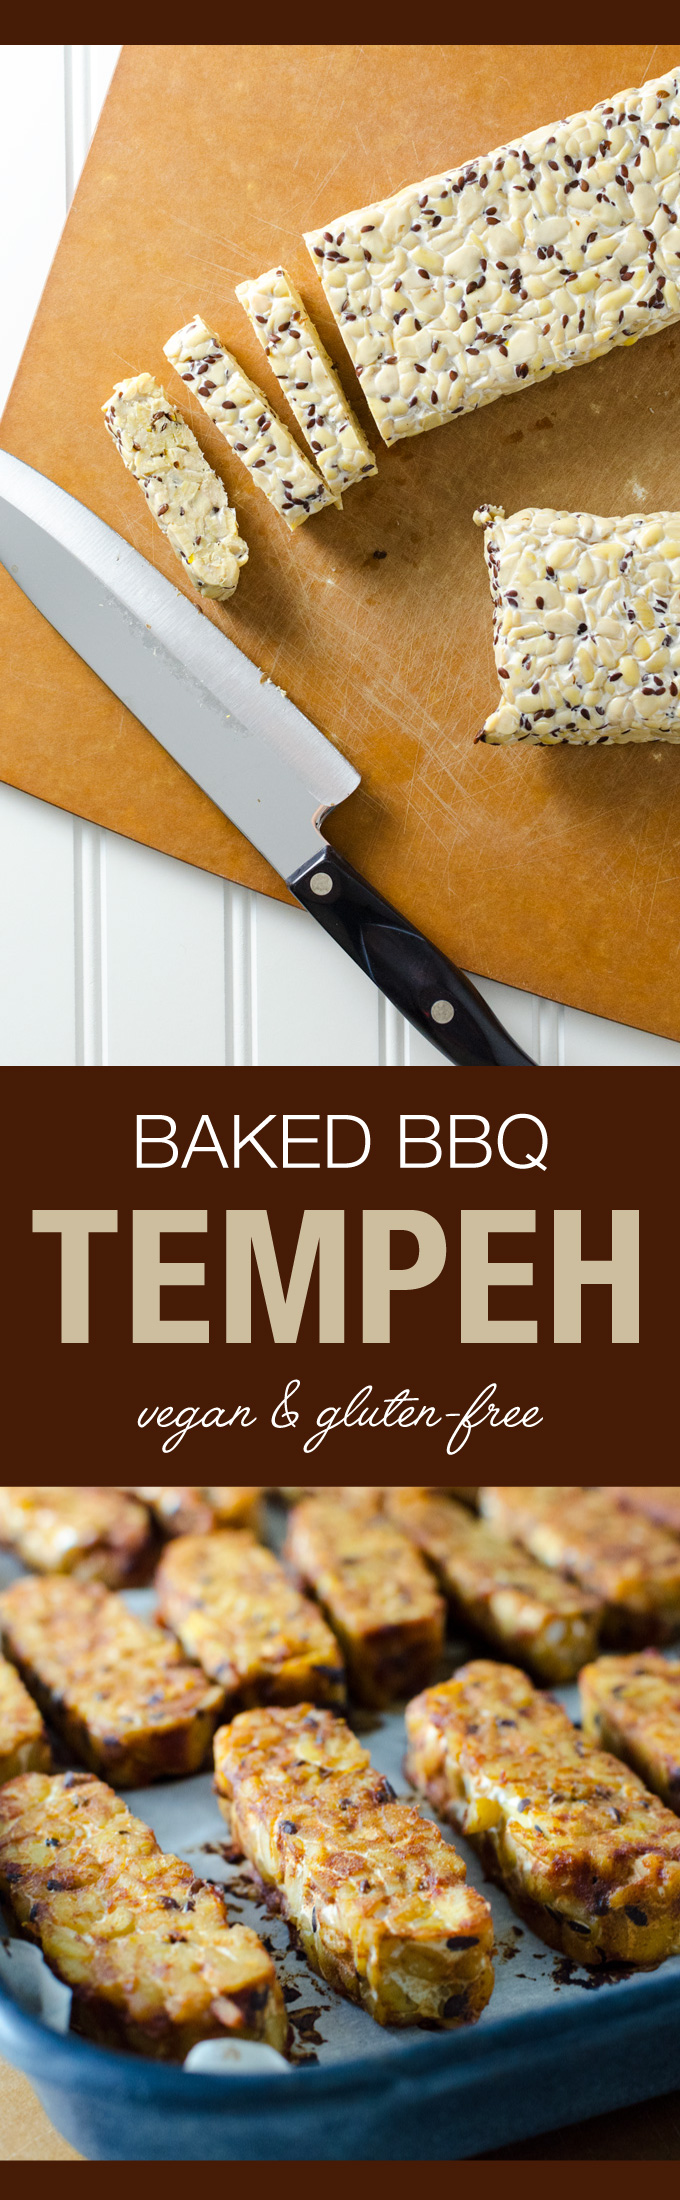 Baked BBQ Tempeh - this quick and easy recipe makes a delicious meat substitute in a variety of gluten-free vegan dishes | VeggiePrimer.com